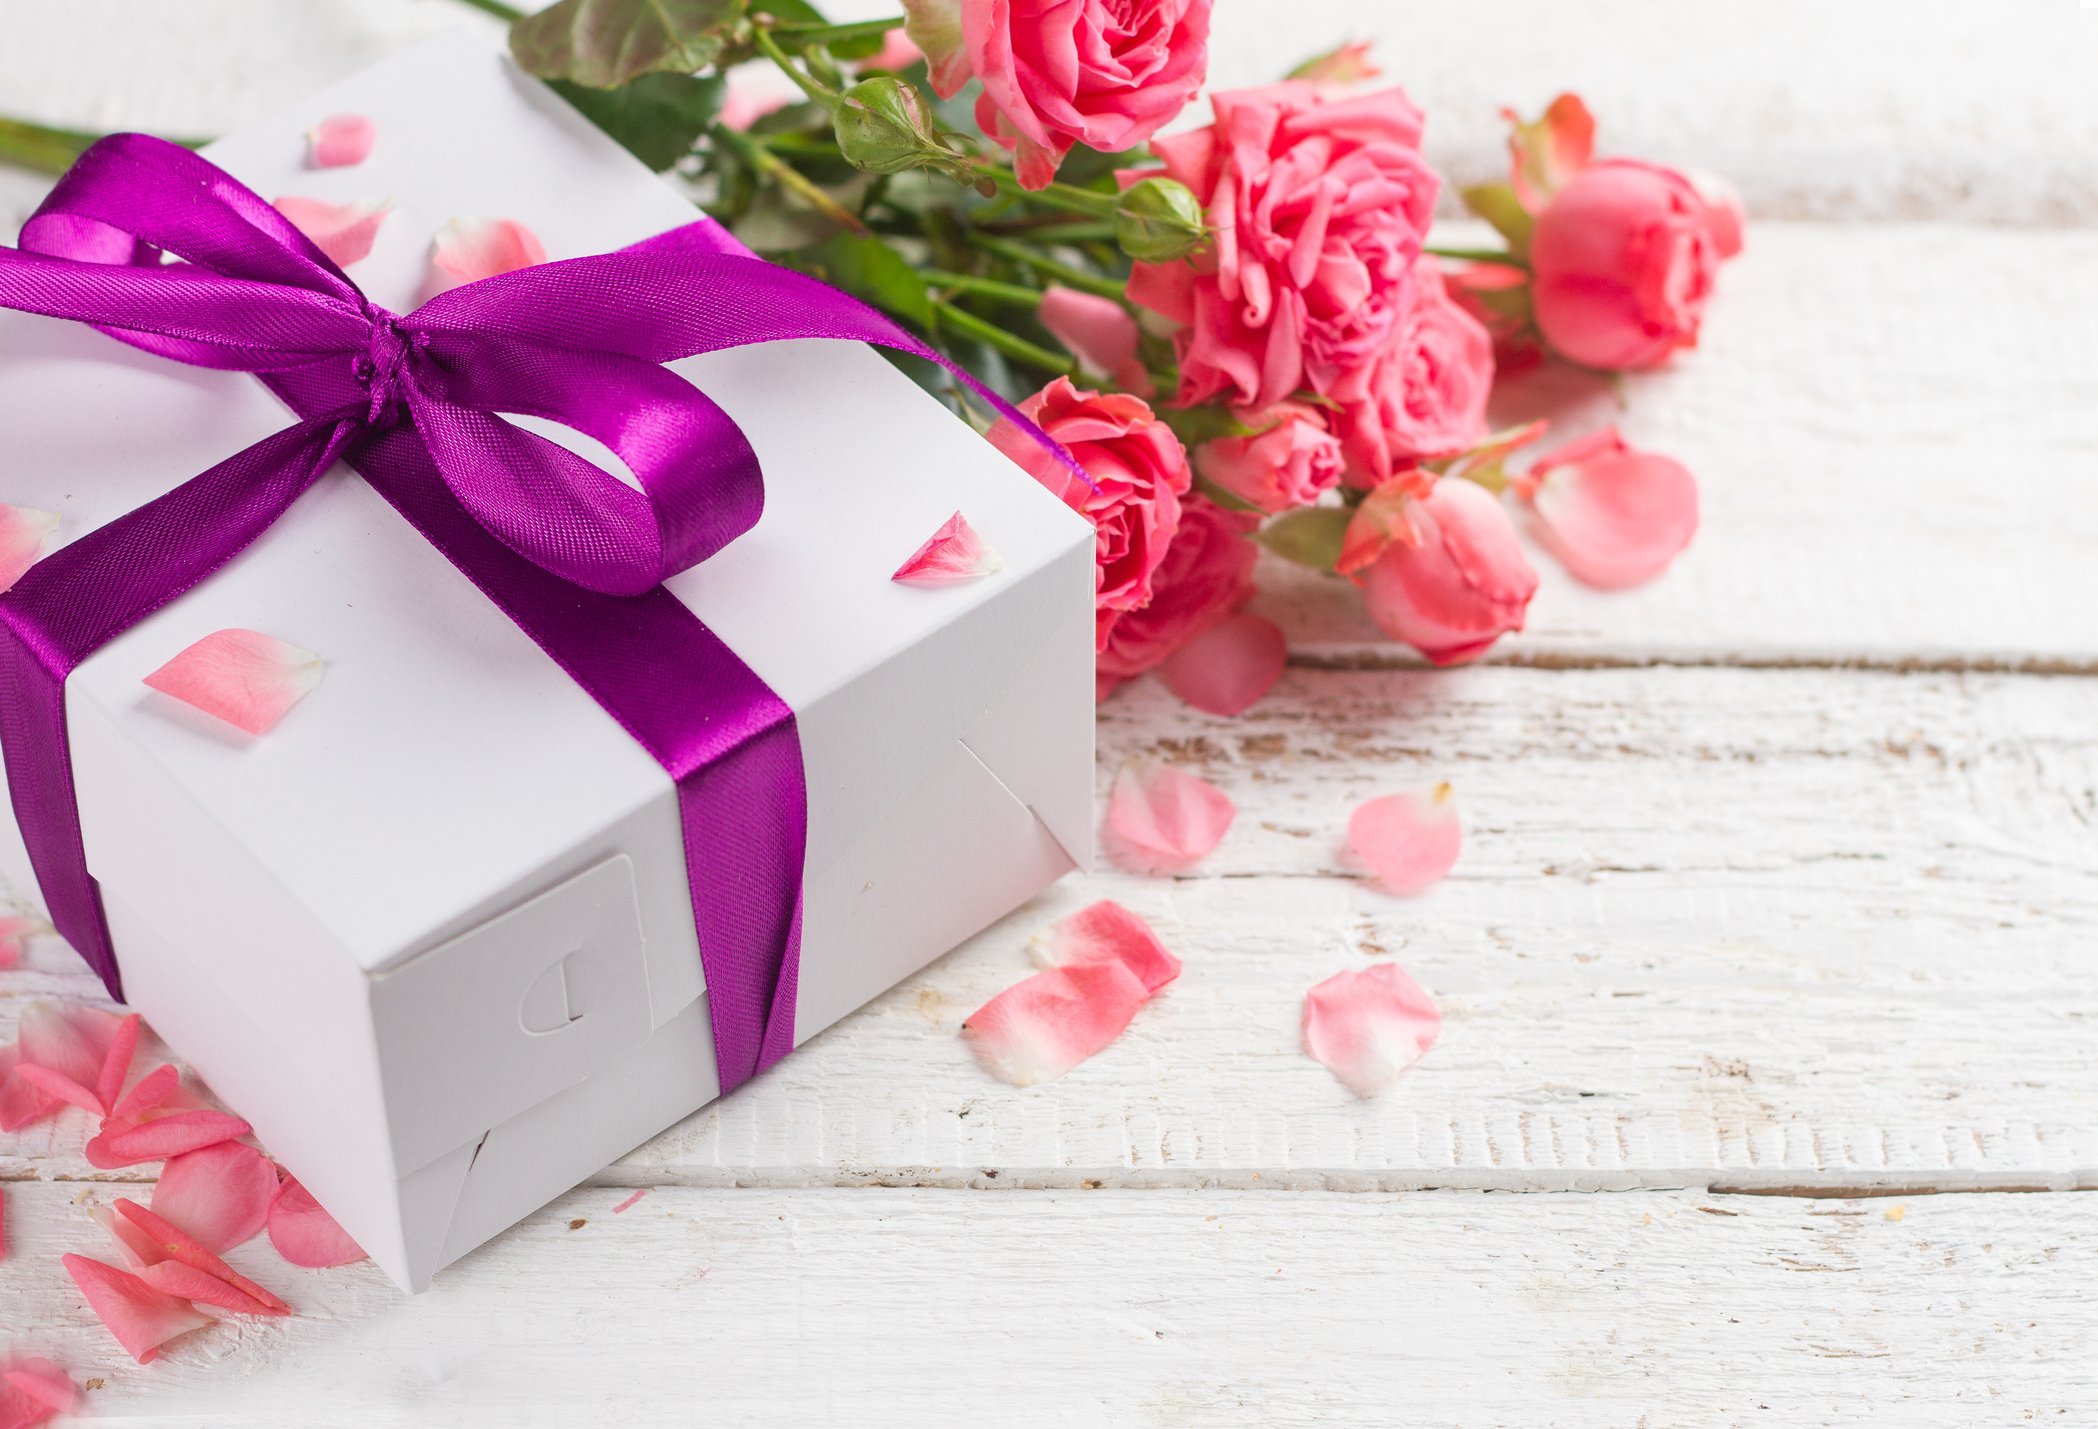 15 Most Thoughtful Frugal Mother's Day Gift Ideas